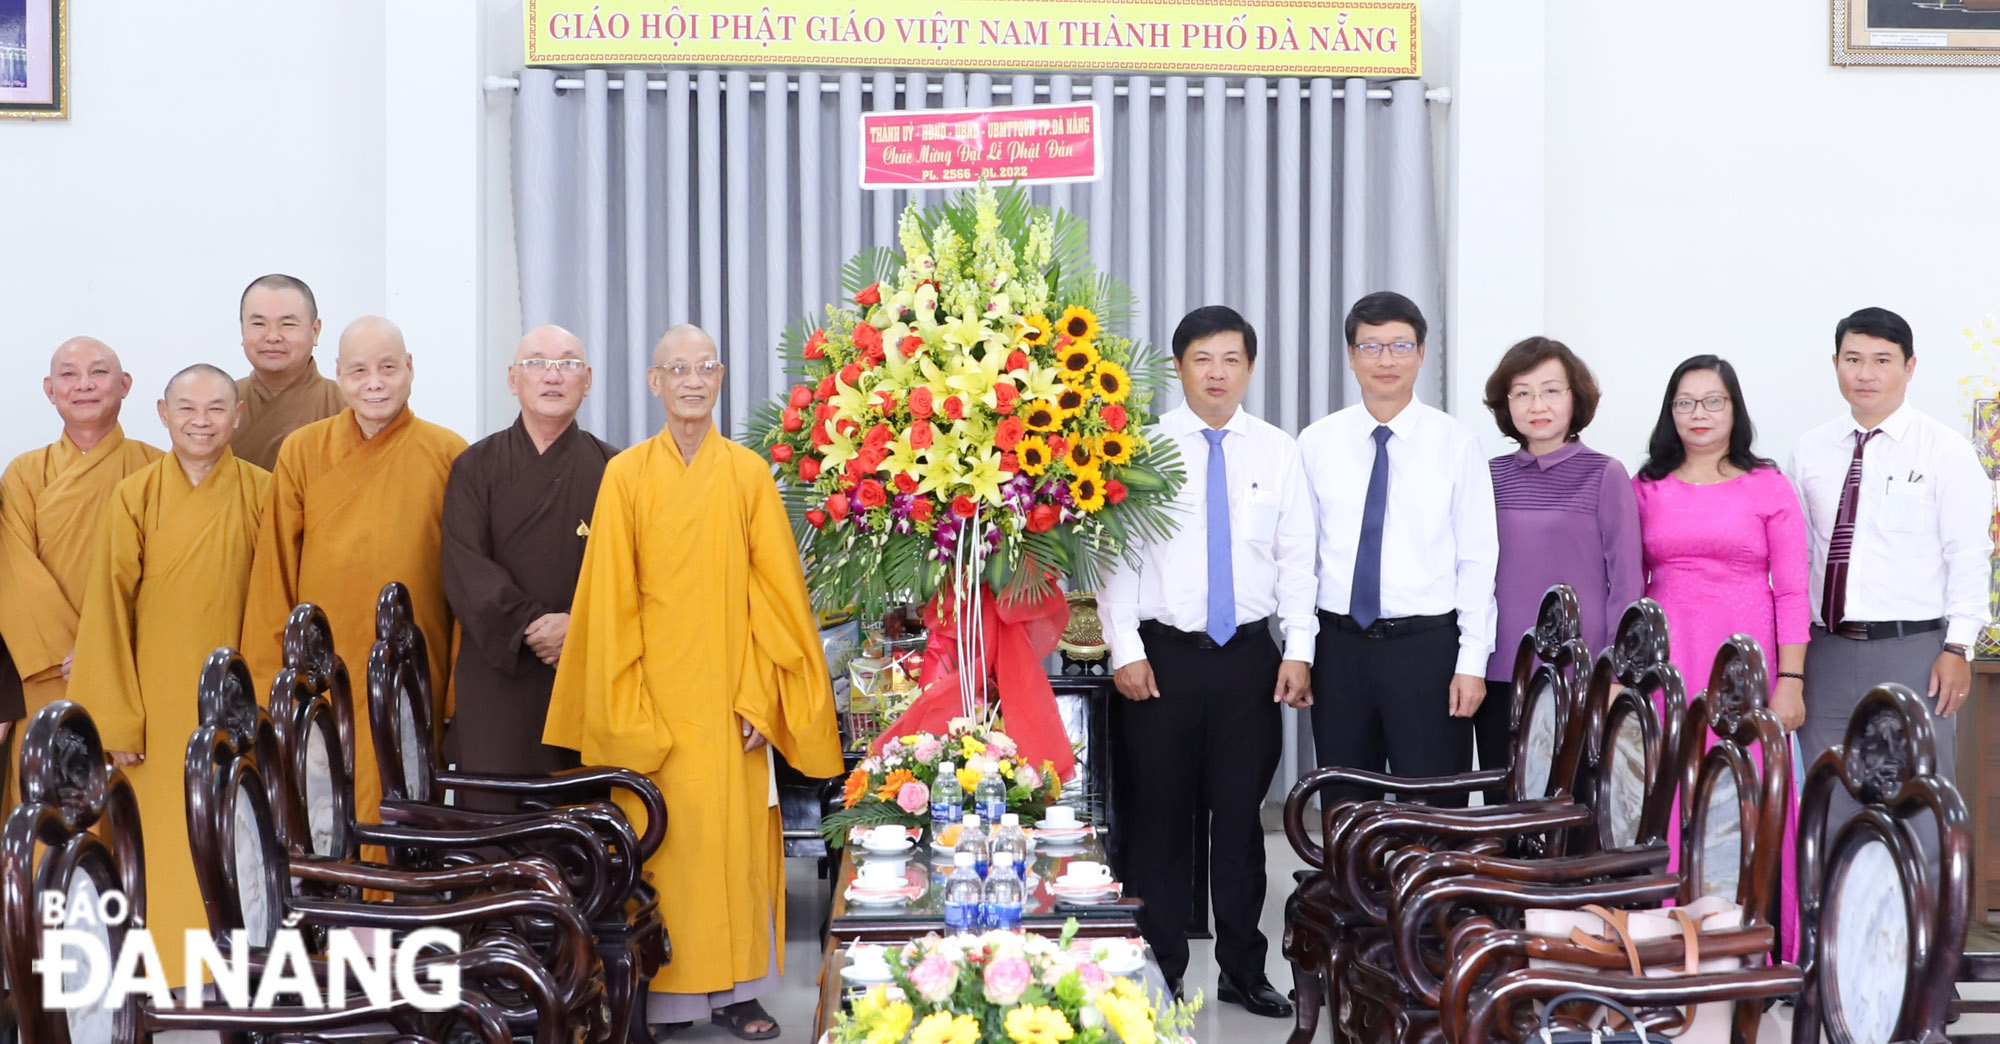 Da Nang Party Committee Deputy Secretary Luong Nguyen Minh Triet (5th right) and some of the city’s leaders extending congratulations to the Executive Board of the Viet Nam Buddhist Sangha in Da Nang on the occasion of the Buddha's 2566th birthday.